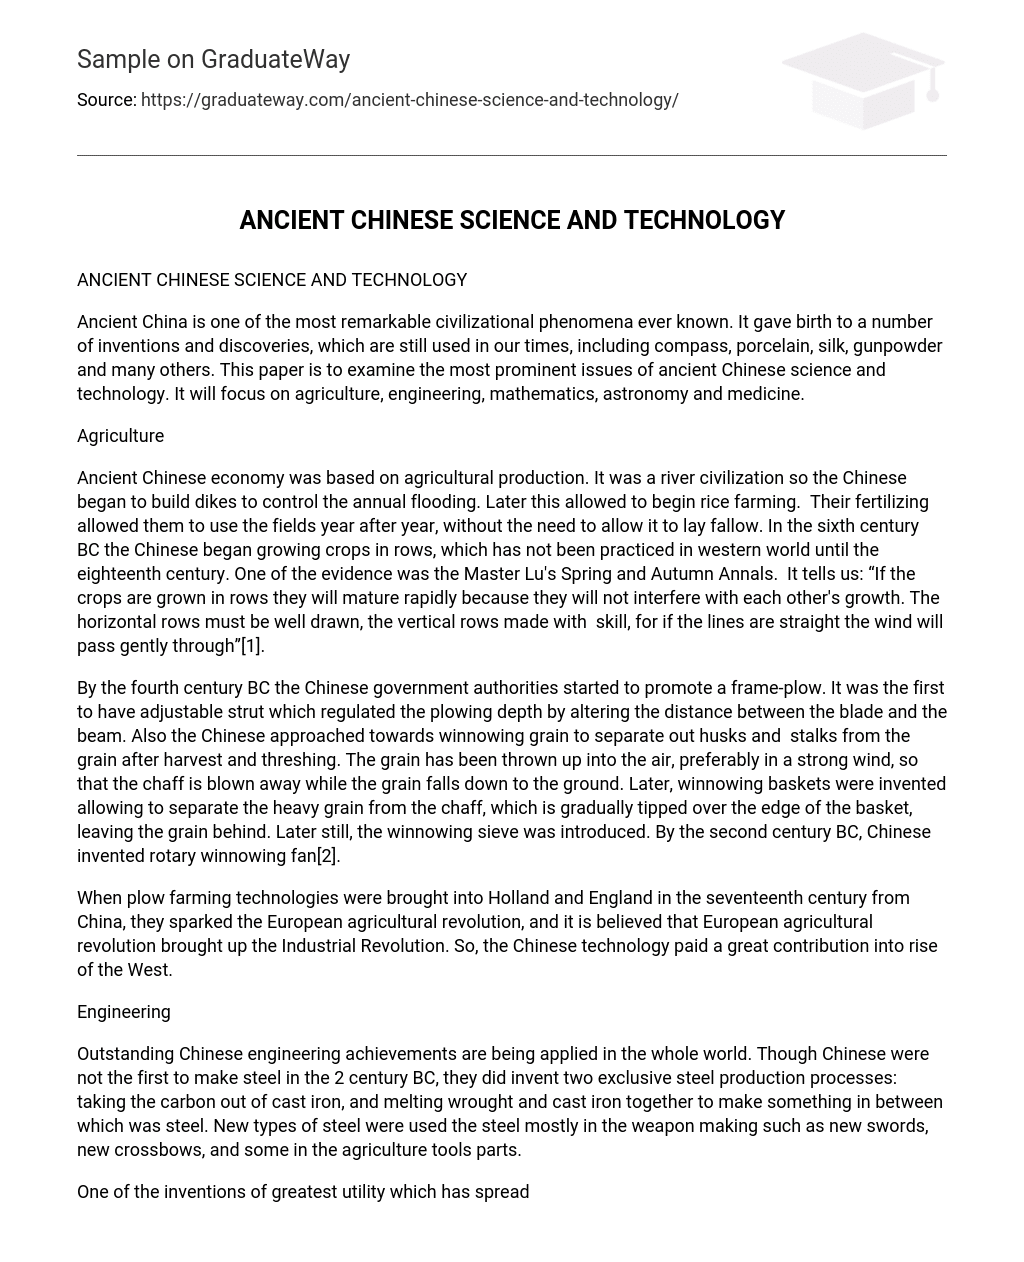 Ancient Chinese Science and Technology